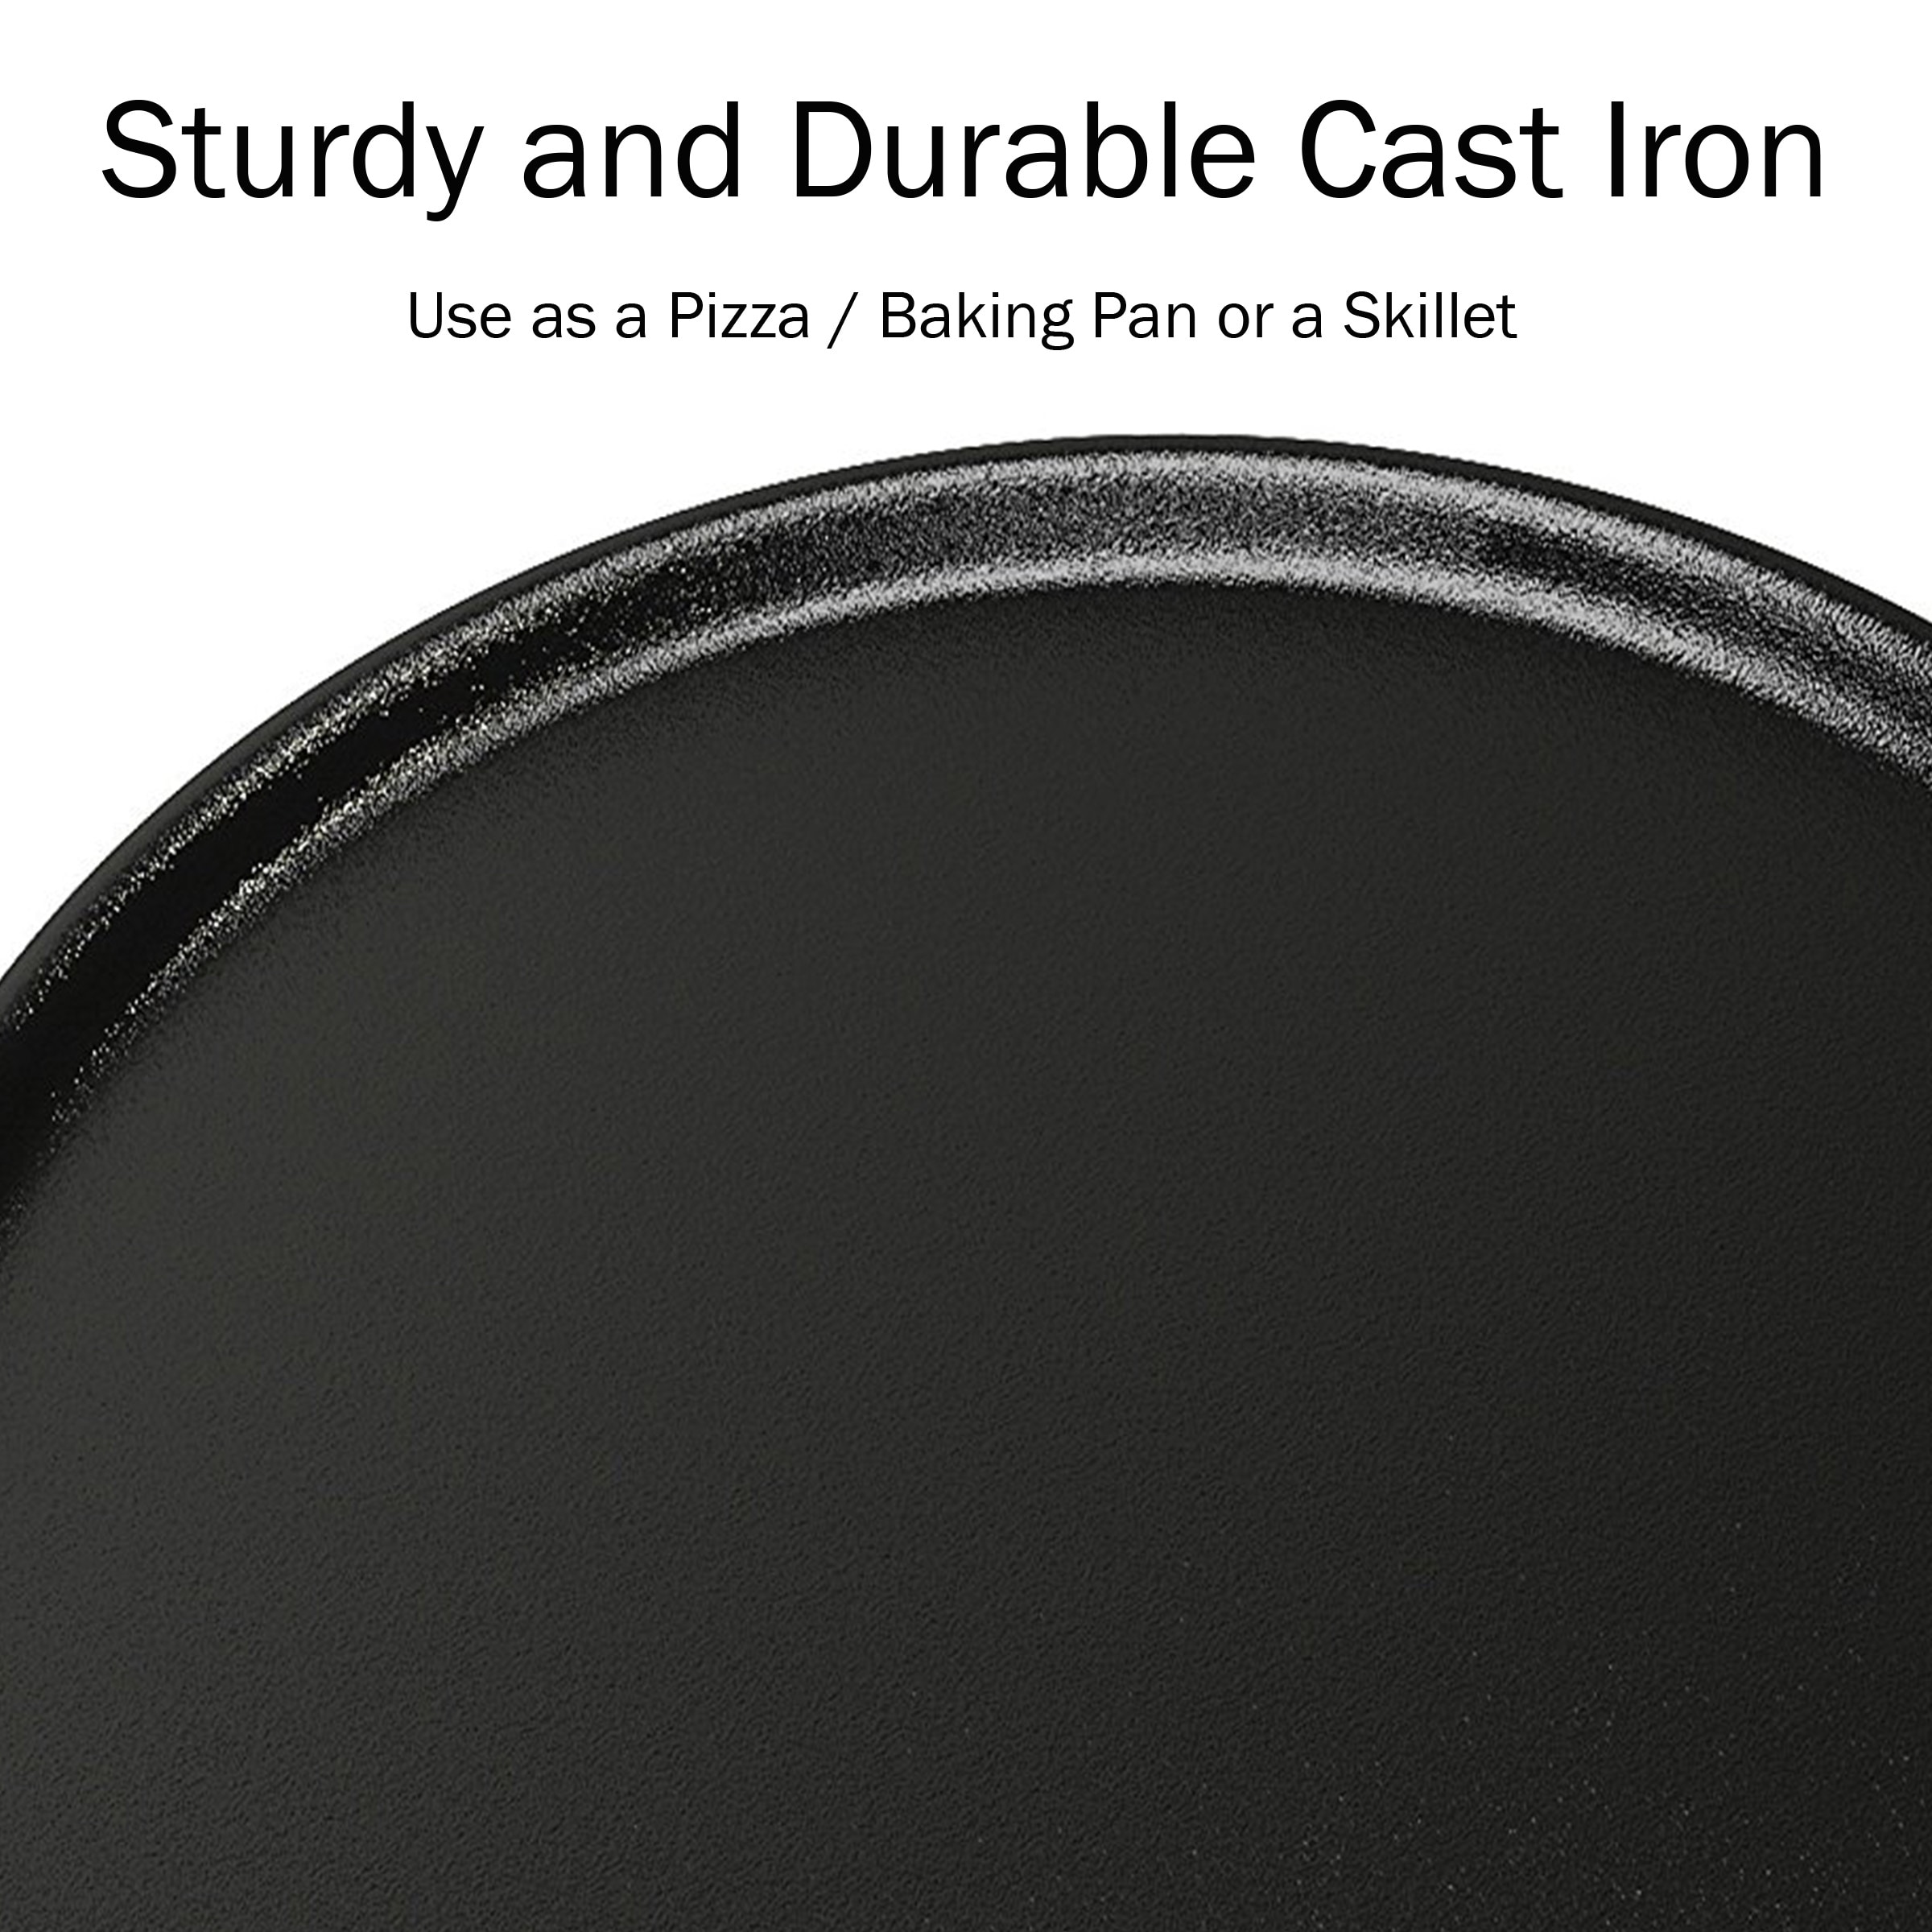  Lodge BOLD 14 Inch Seasoned Cast Iron Pizza Pan, Design-Forward  Cookware & Seasoned Cast Iron Skillet with 2 Loop Handles - 17 Inch  Ergonomic Frying Pan: Home & Kitchen